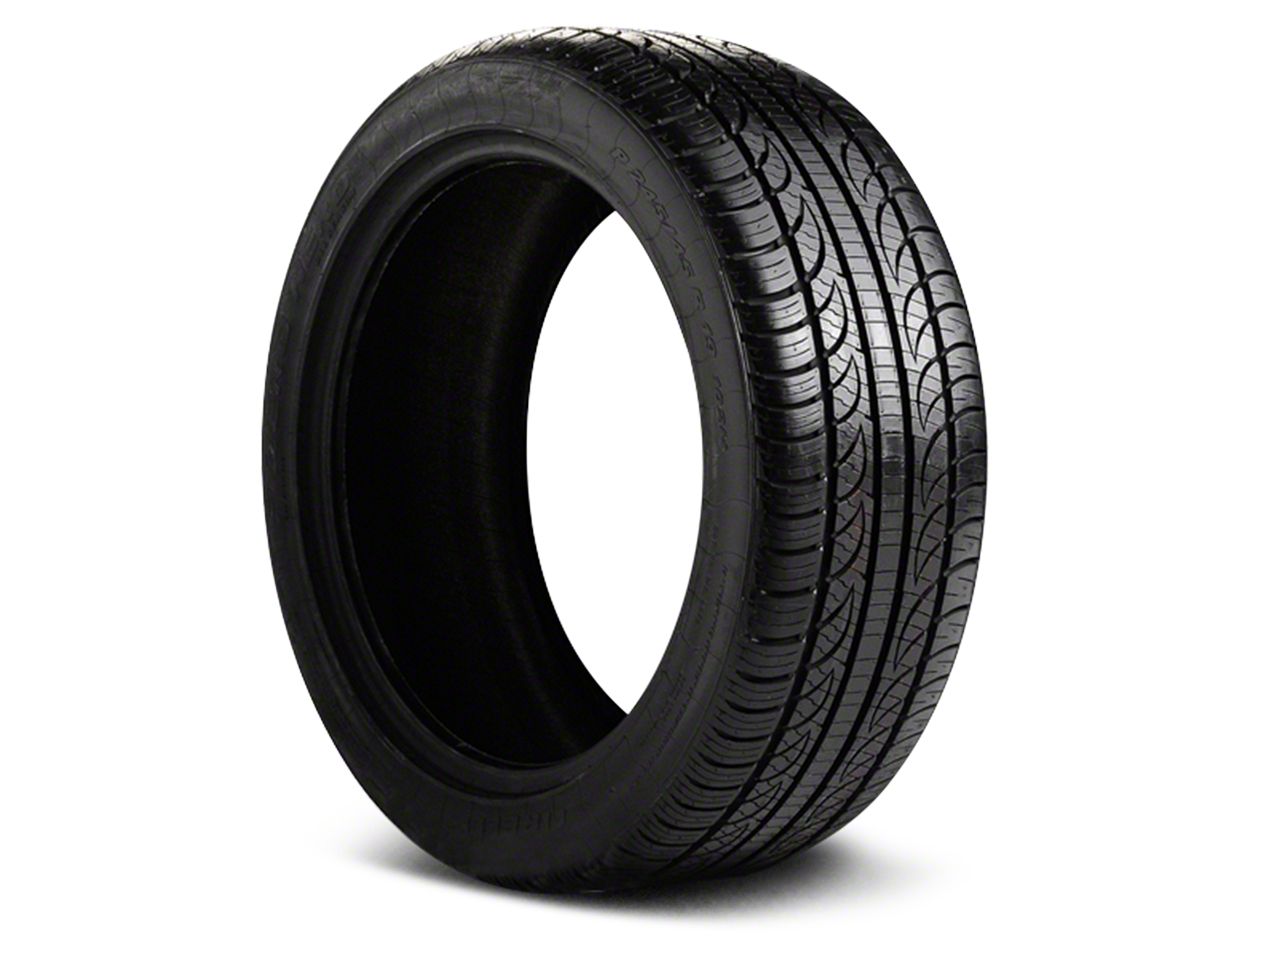 Mustang All Season Ford Tires 1999-2004